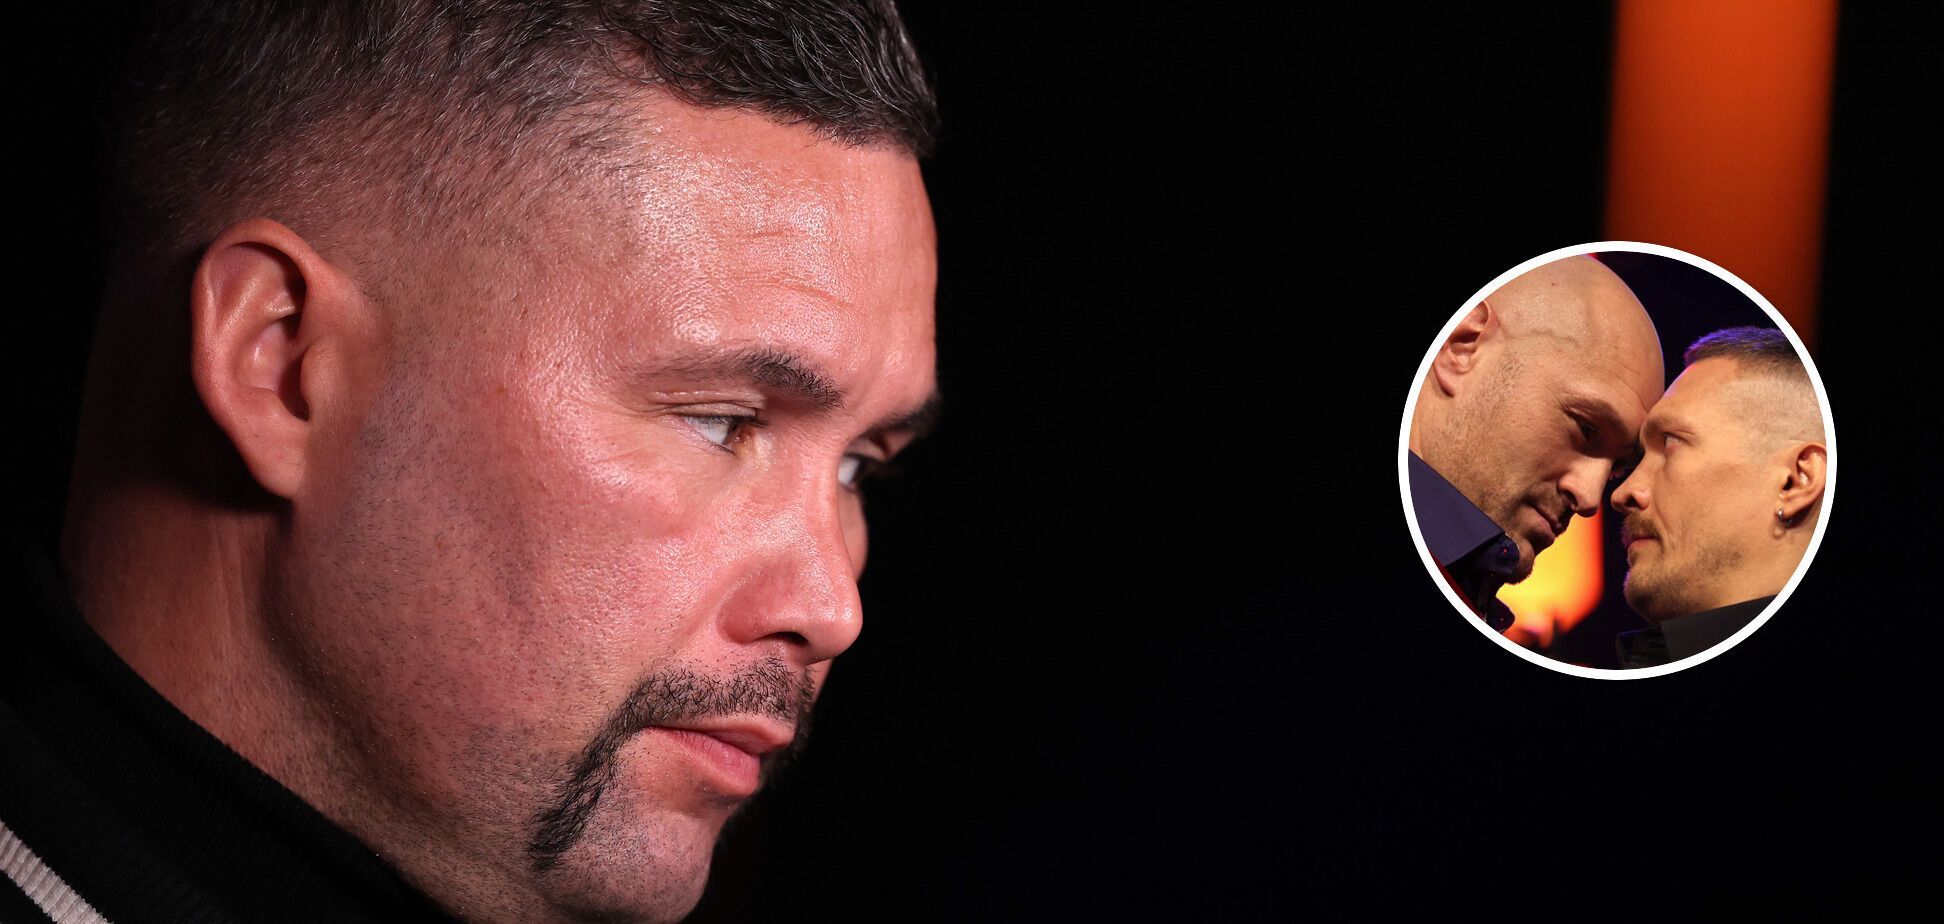 ''Out of this world''. Bellew says what will happen in the Usyk-Fury fight